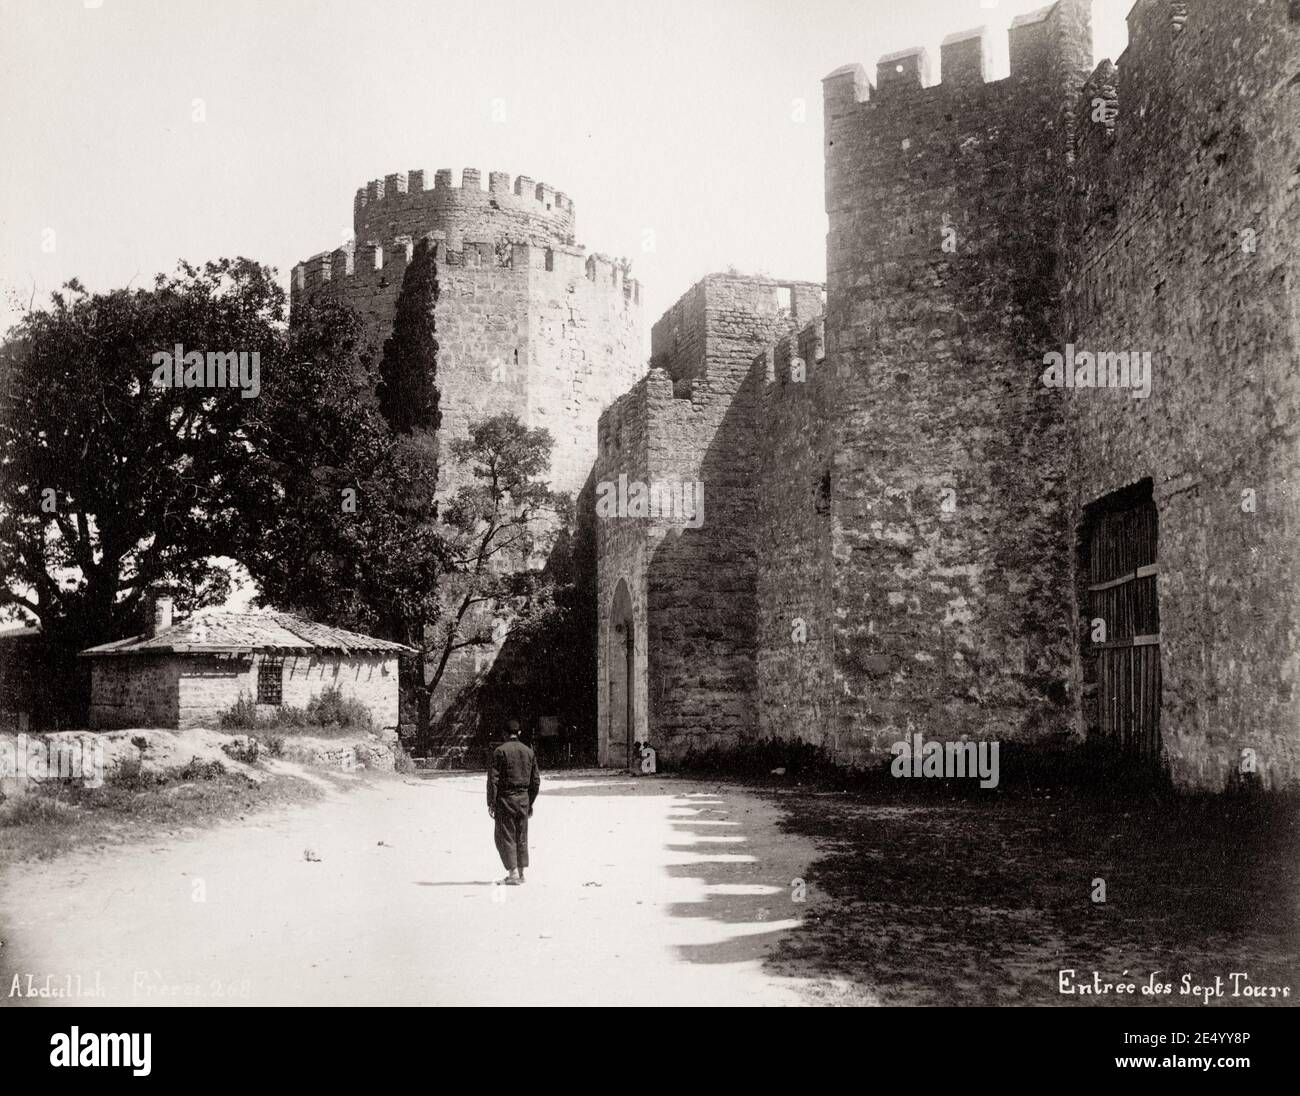 Vintage 19th century photograph: Yedikule Fortress (Turkish: Yedikule  Hisarı or Yedikule Zindanları; meaning Fortress of the Seven Towers, or  Dungeons of the Seven Towers, respectively) is a fortified historic  structure located in